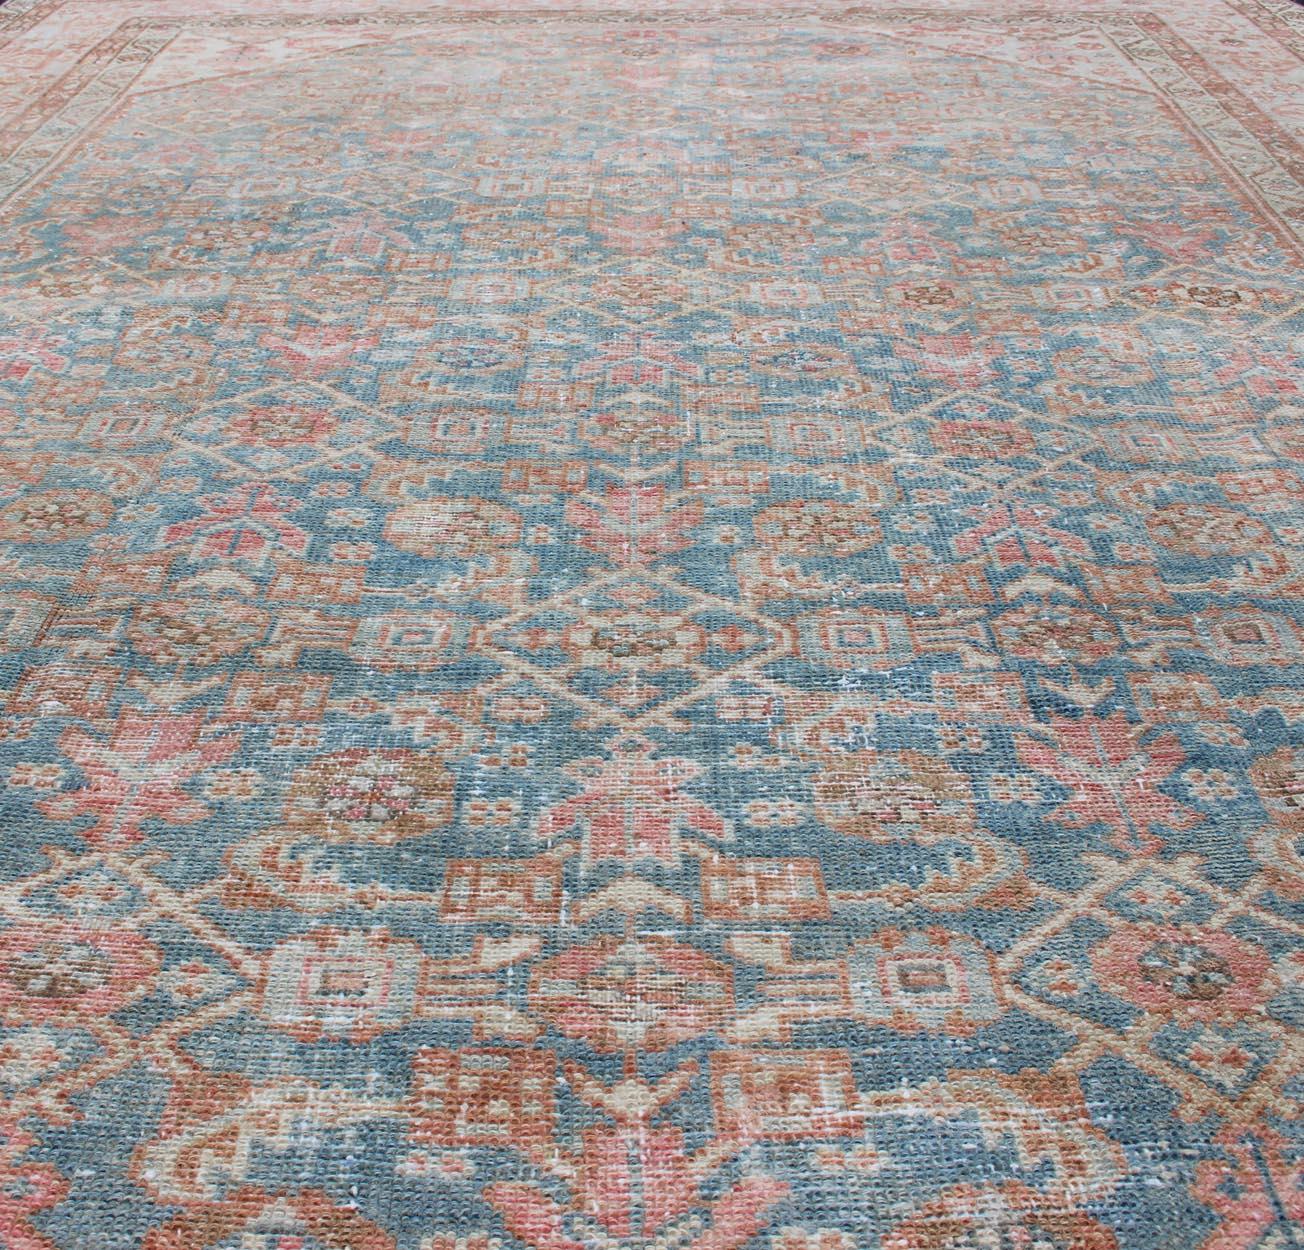 Early 20th Century Antique Malayer Carpet with All-Over Design in Blue Gray Tones For Sale